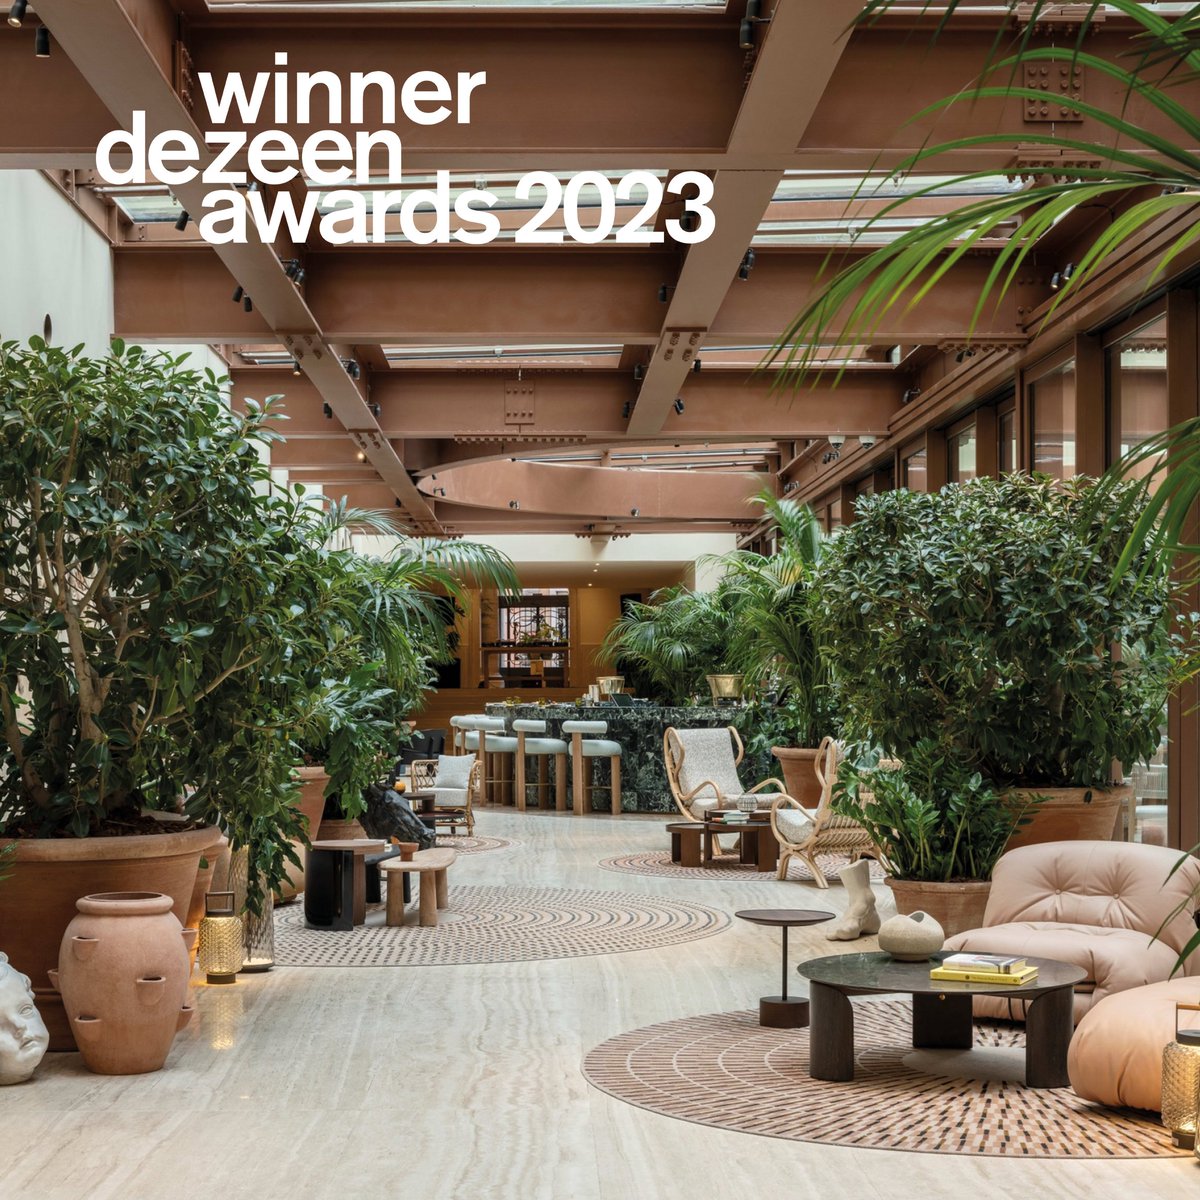 Proud to announce that also Six Senses Rome has received the Hotel and short stay interior of the year 2023 from @dezeen Thanks to the jury of @dezeenawards , it is a great honour! #dezeen #dezeenawards #sixsensesrome